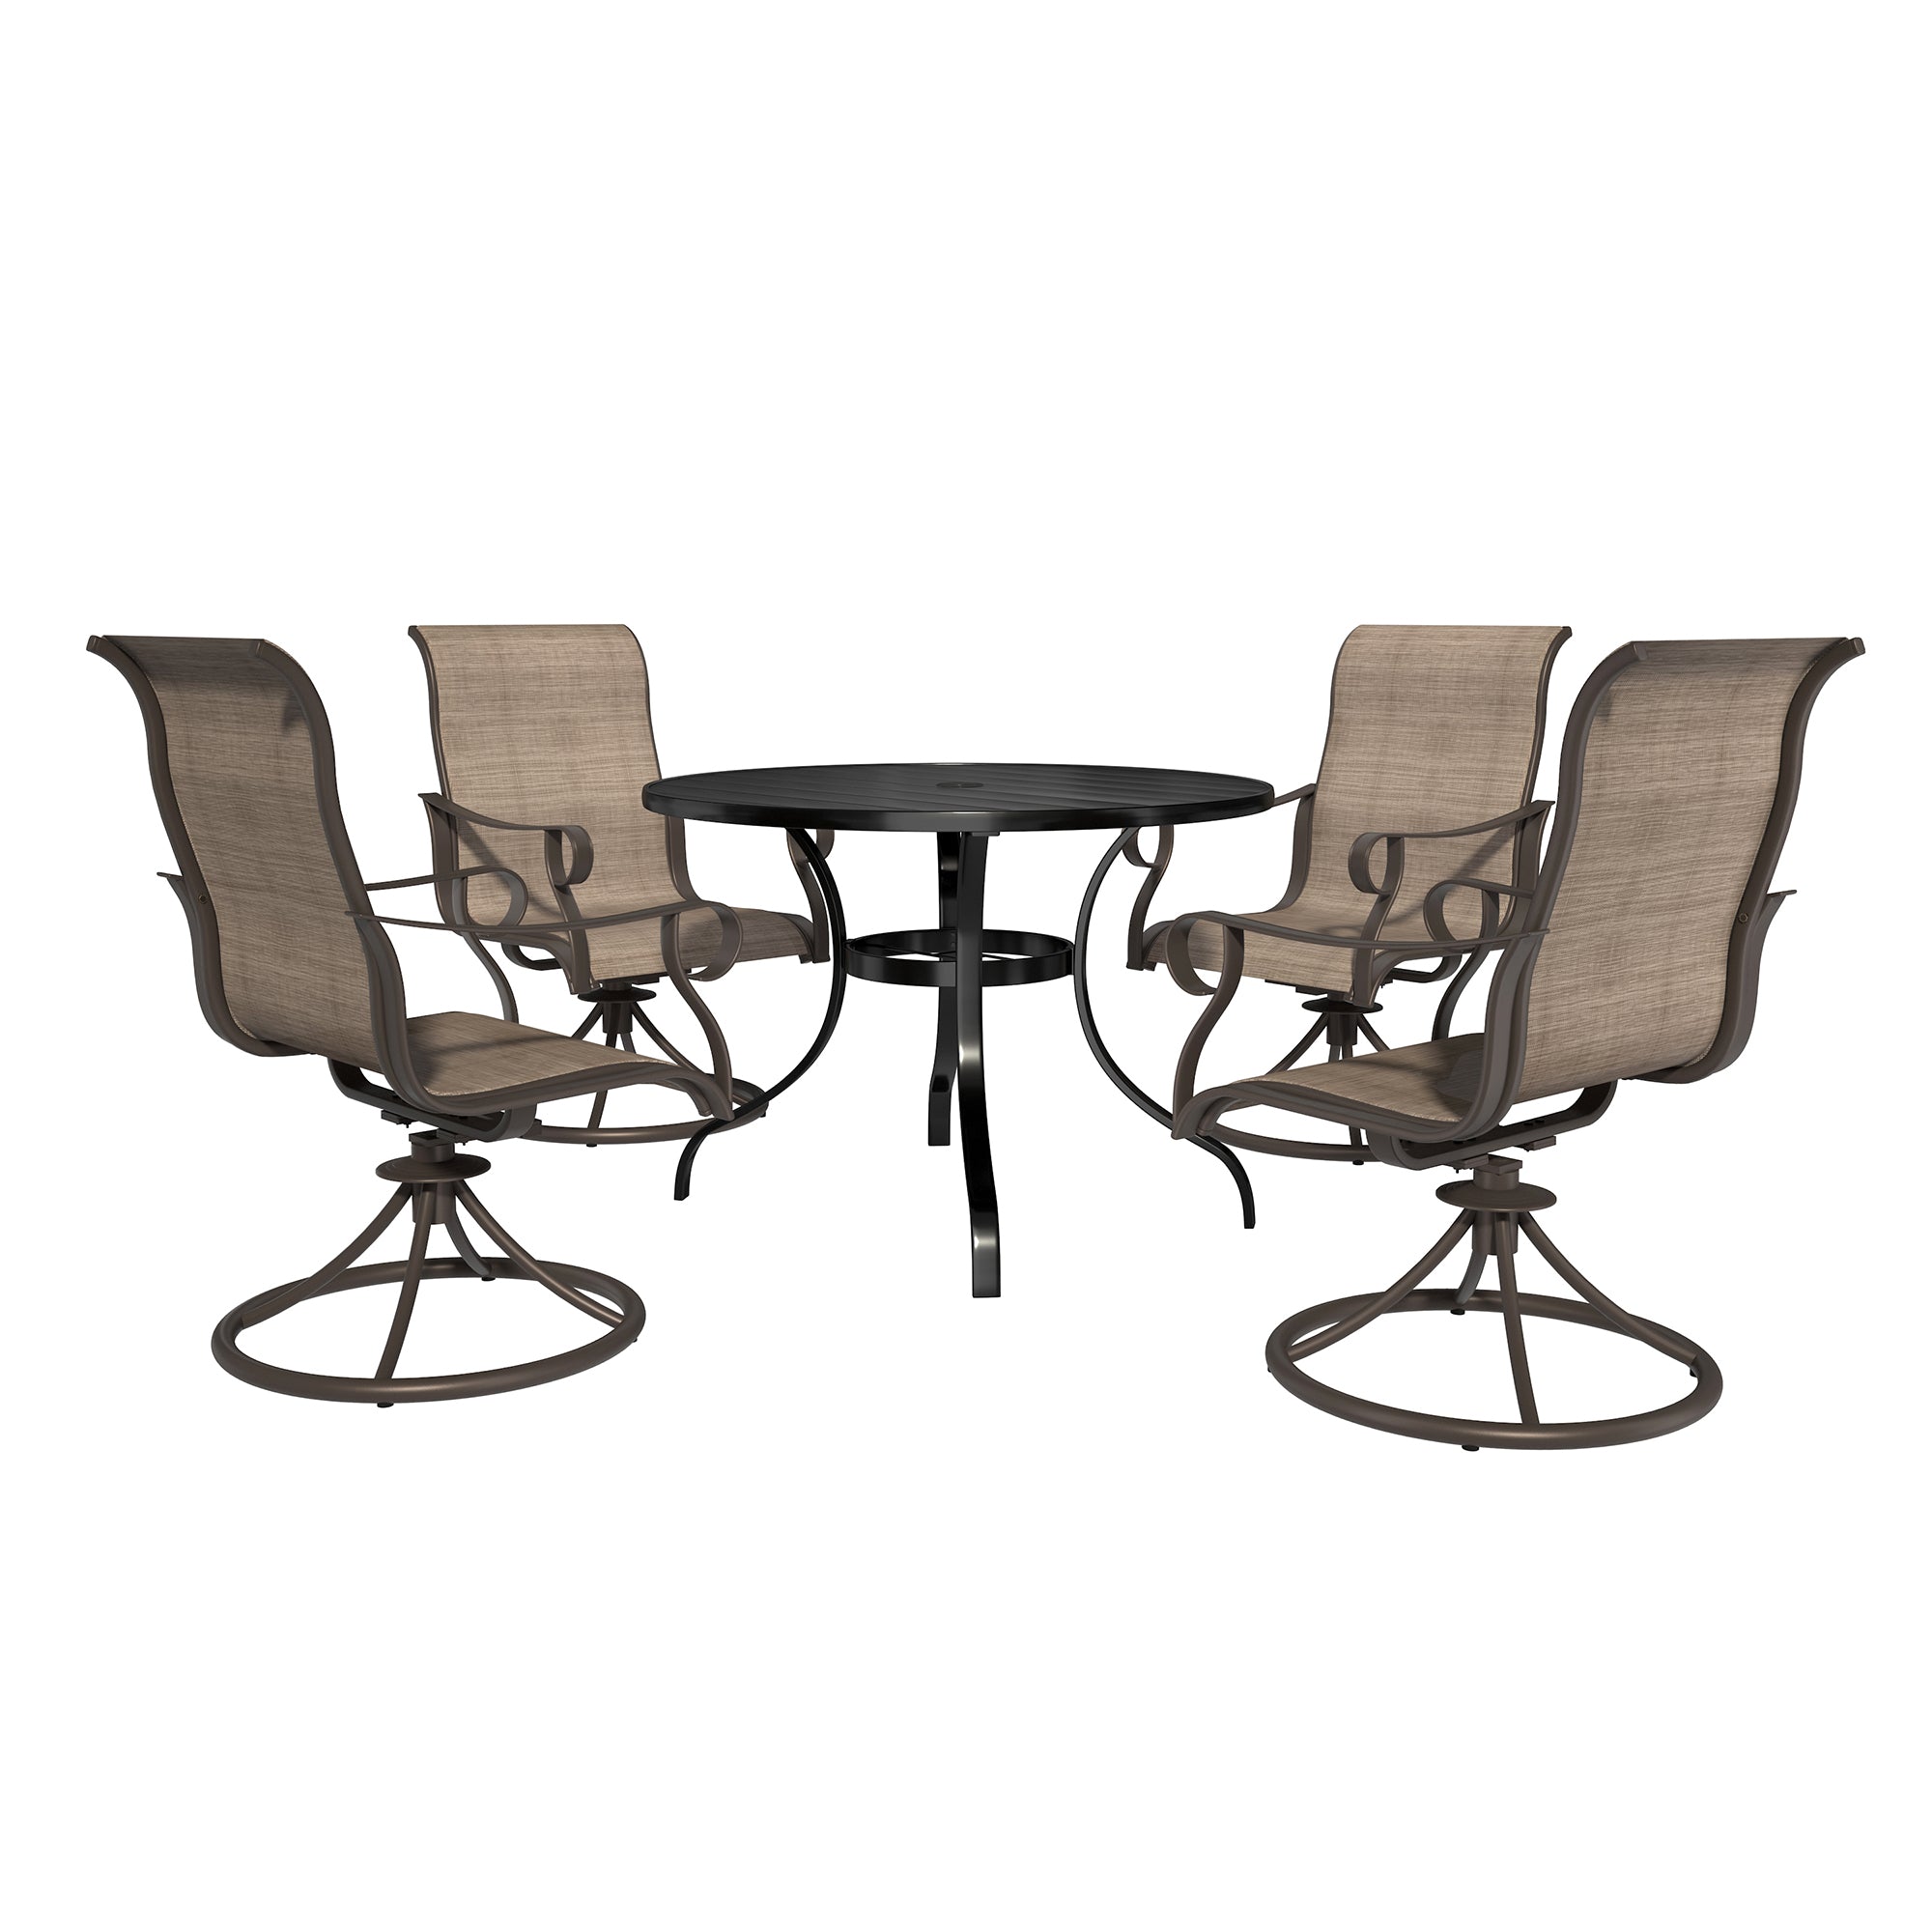 Outdoor 5 Piece Steel Patio Swivel Chair Dining Set(1 Round Table,4 Chairs)，Made From Powder-Coated Steel Frame To Maximize Comfort And Style